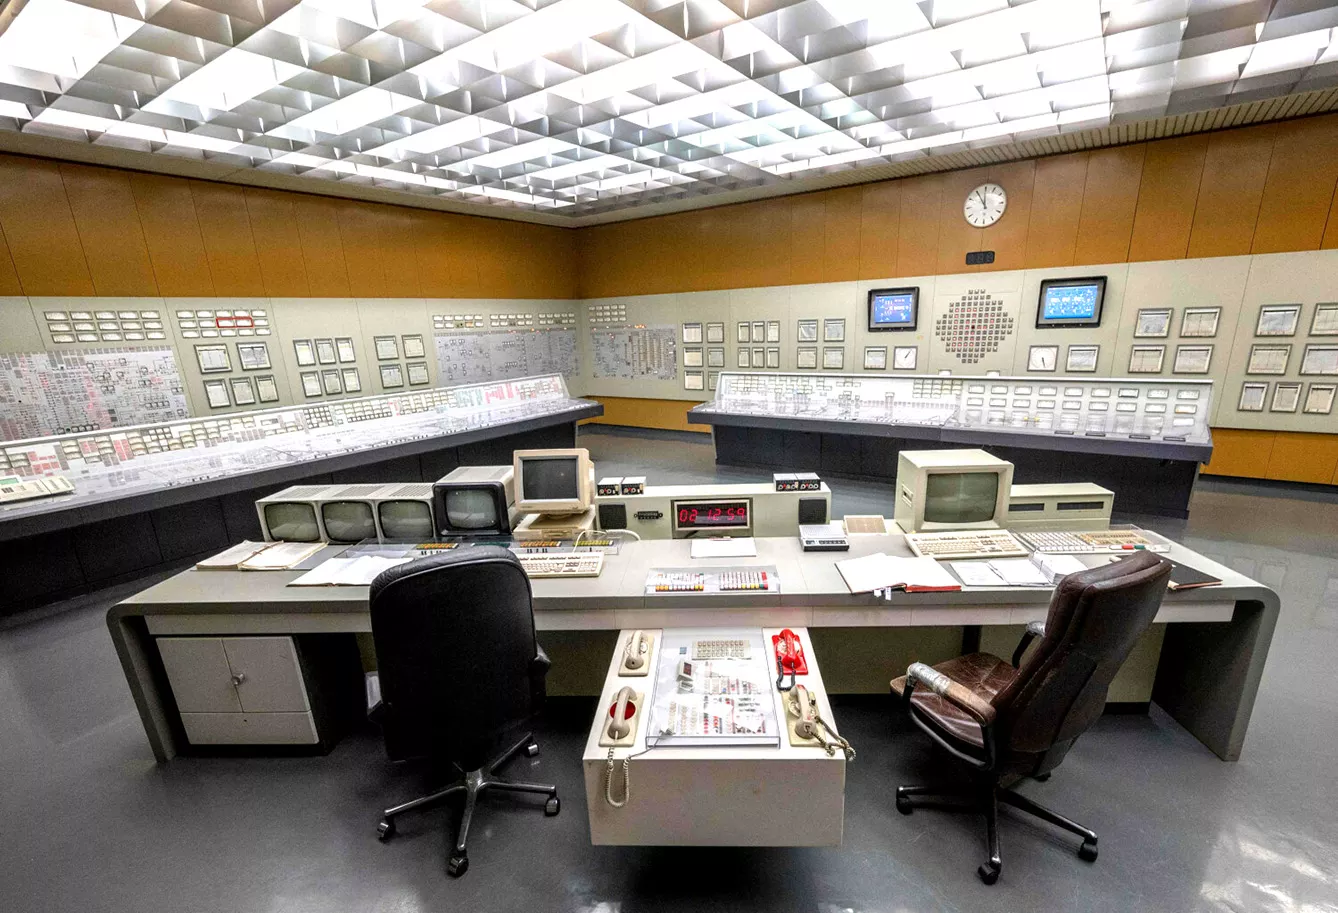 Control center of the closed nuclear power plant